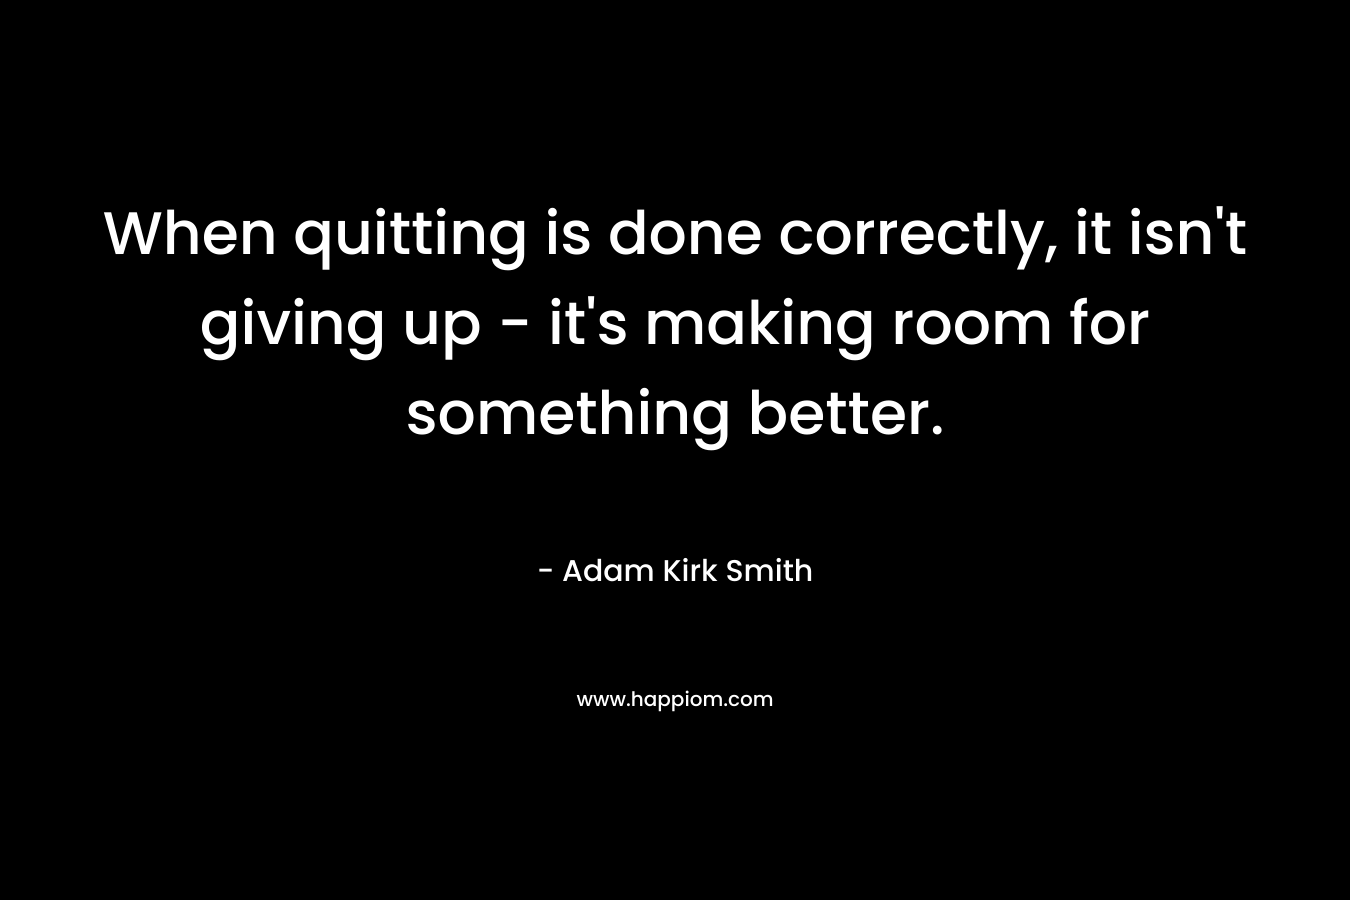 When quitting is done correctly, it isn't giving up - it's making room for something better.